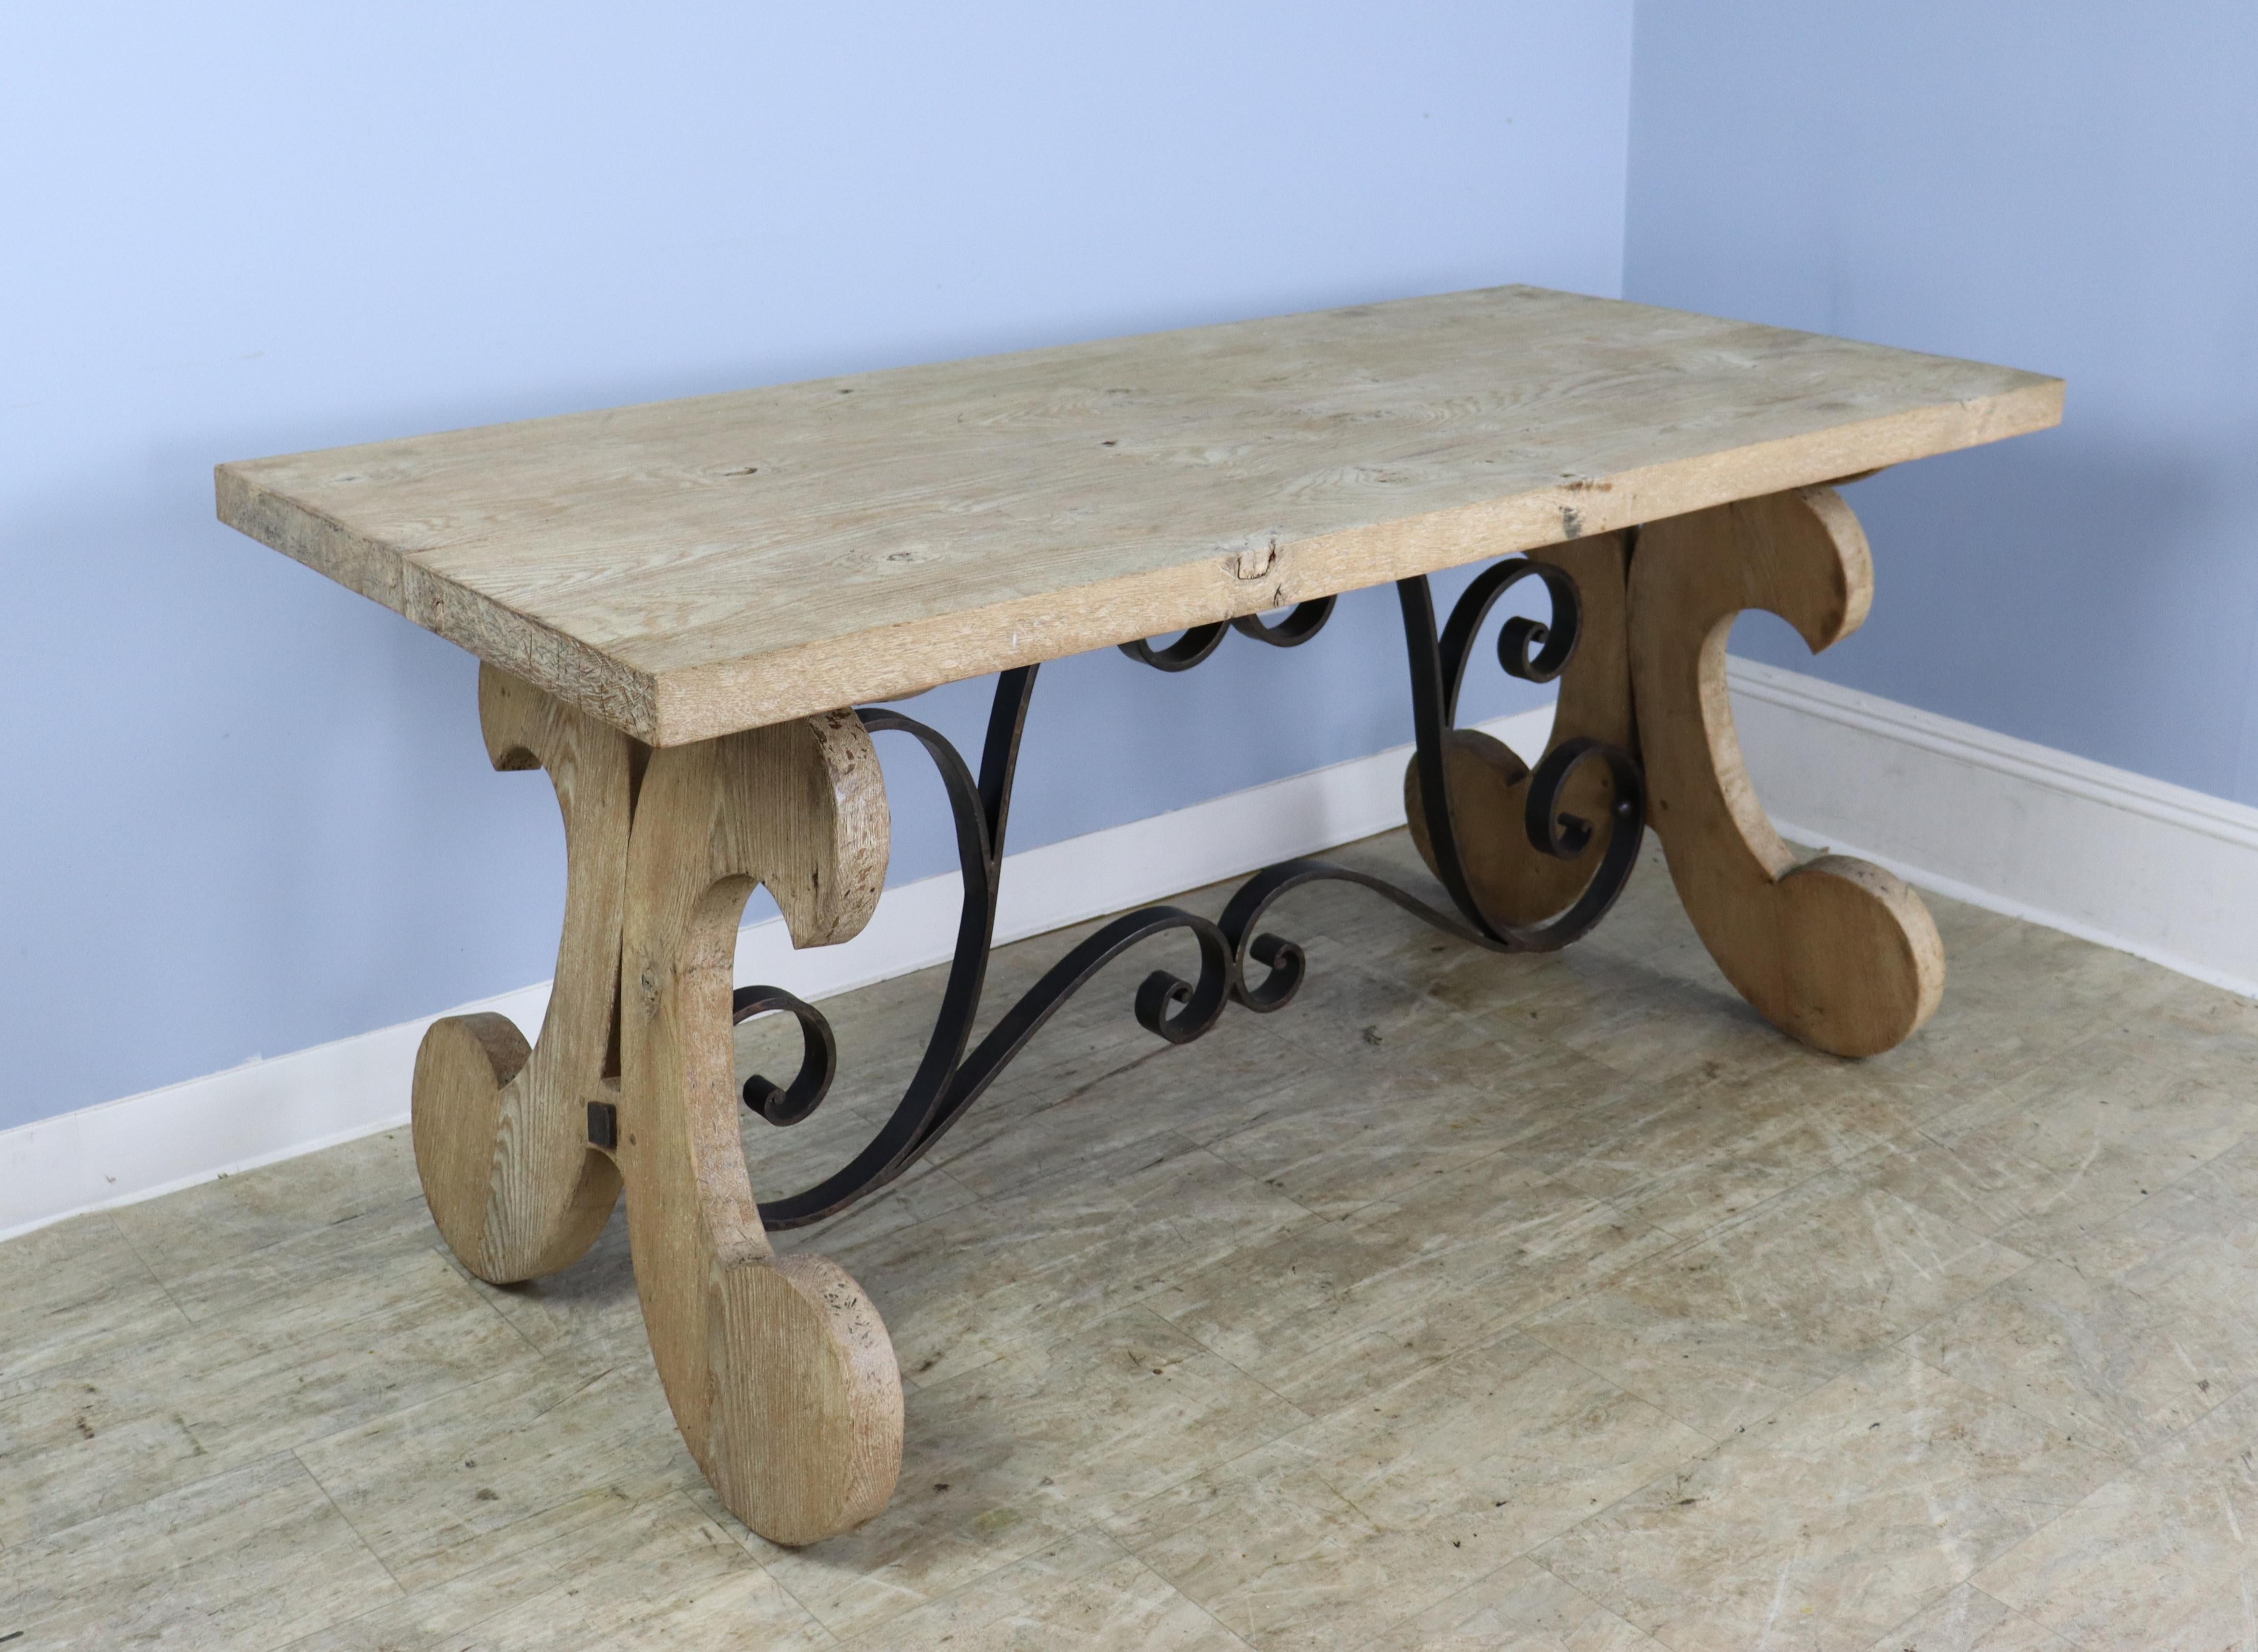 A handsome bleached oak farm table with an Iberian style trestle base and a 2 inch thick top. The piece has very good oak grain throughout and the light wood gives it a modern sensibility. No apron or legs means this table can accommodate 6, and